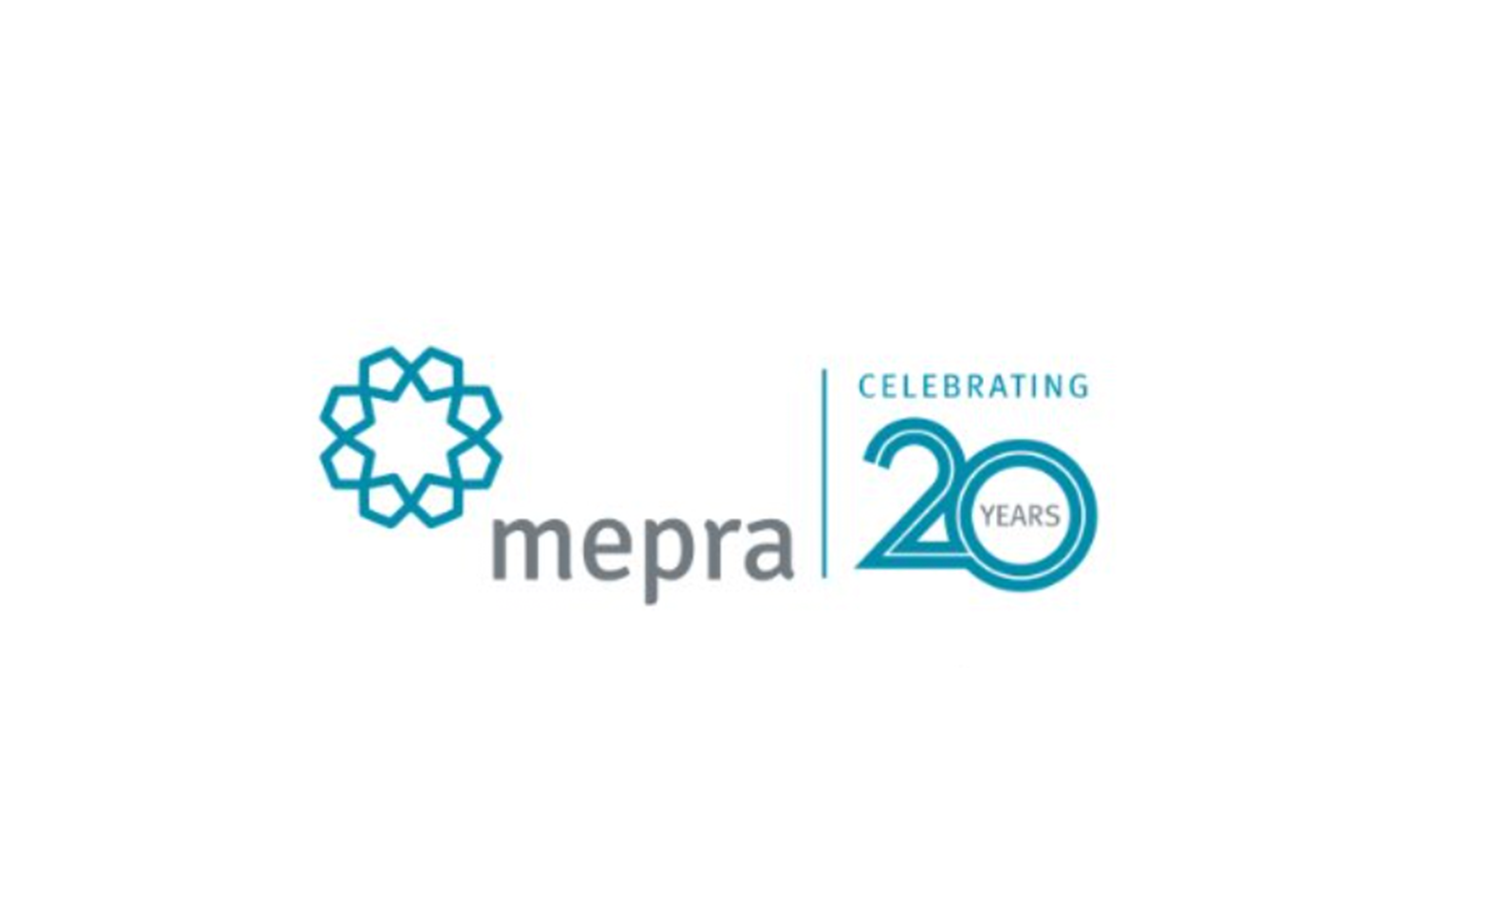 MEPRA Explains Why They Introduced a People's Choice Award Category For This Year's Award Show